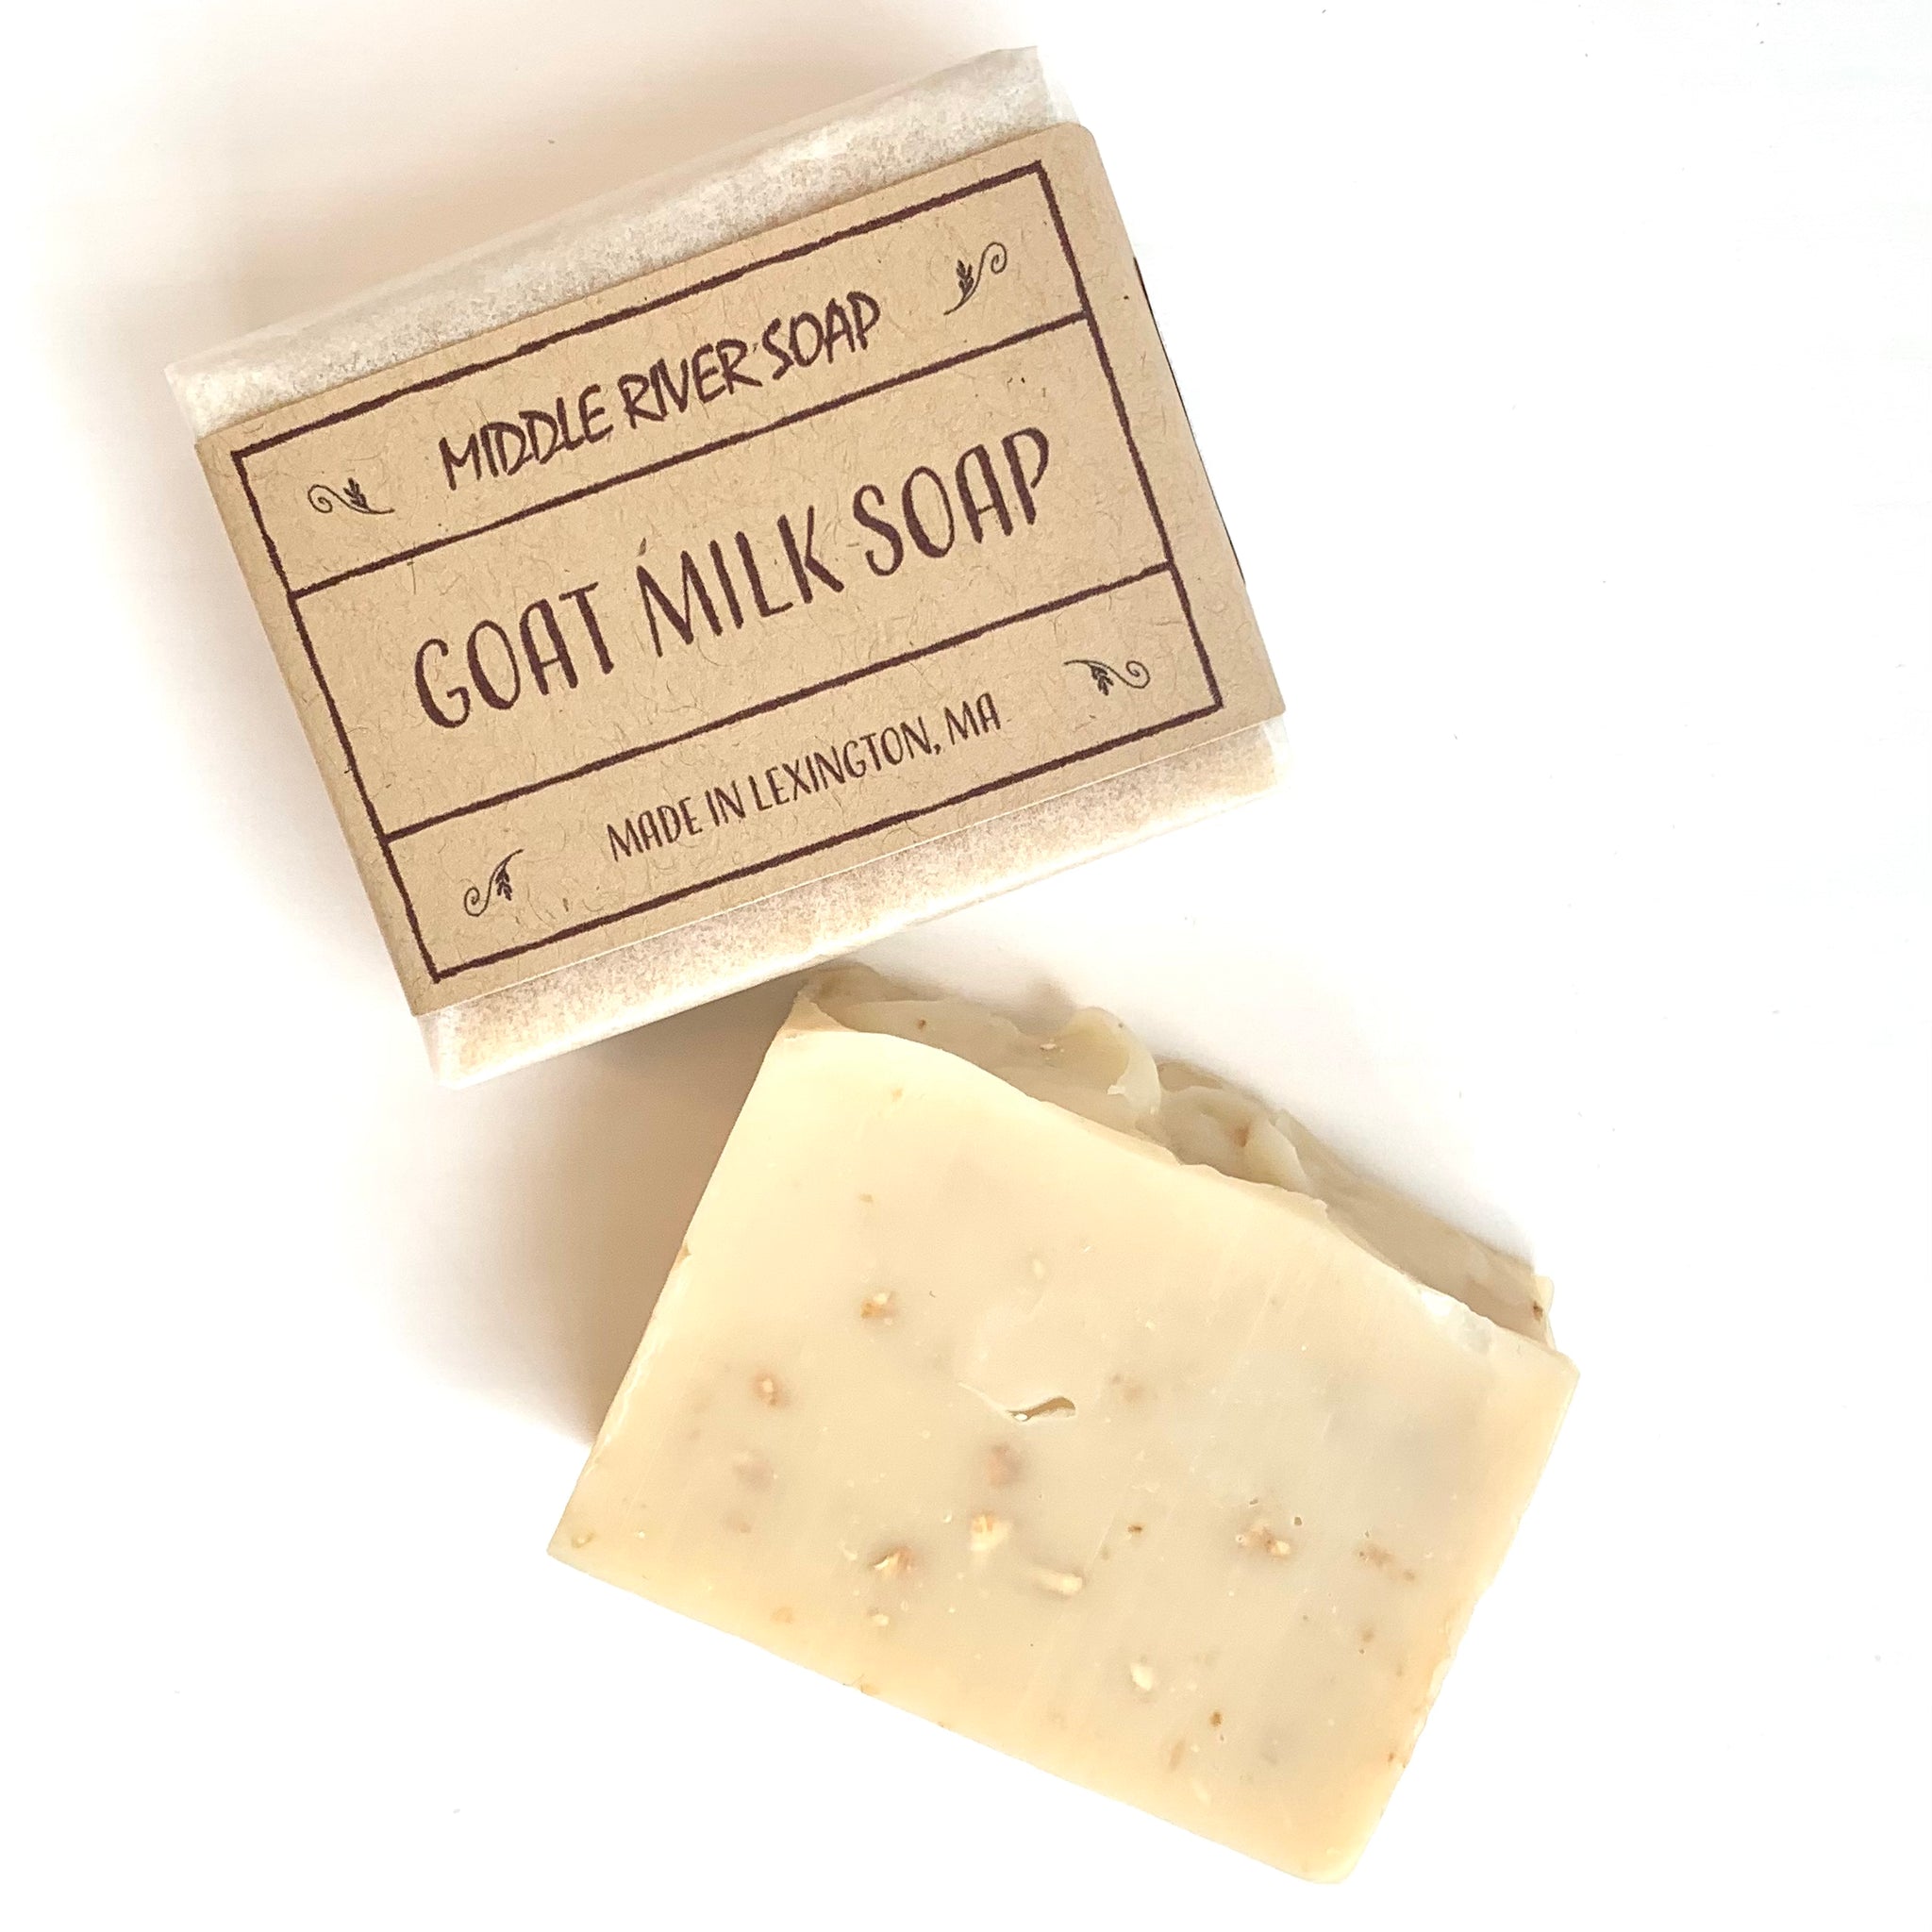 Middle River Goat Milk Soap with Honey and Oats